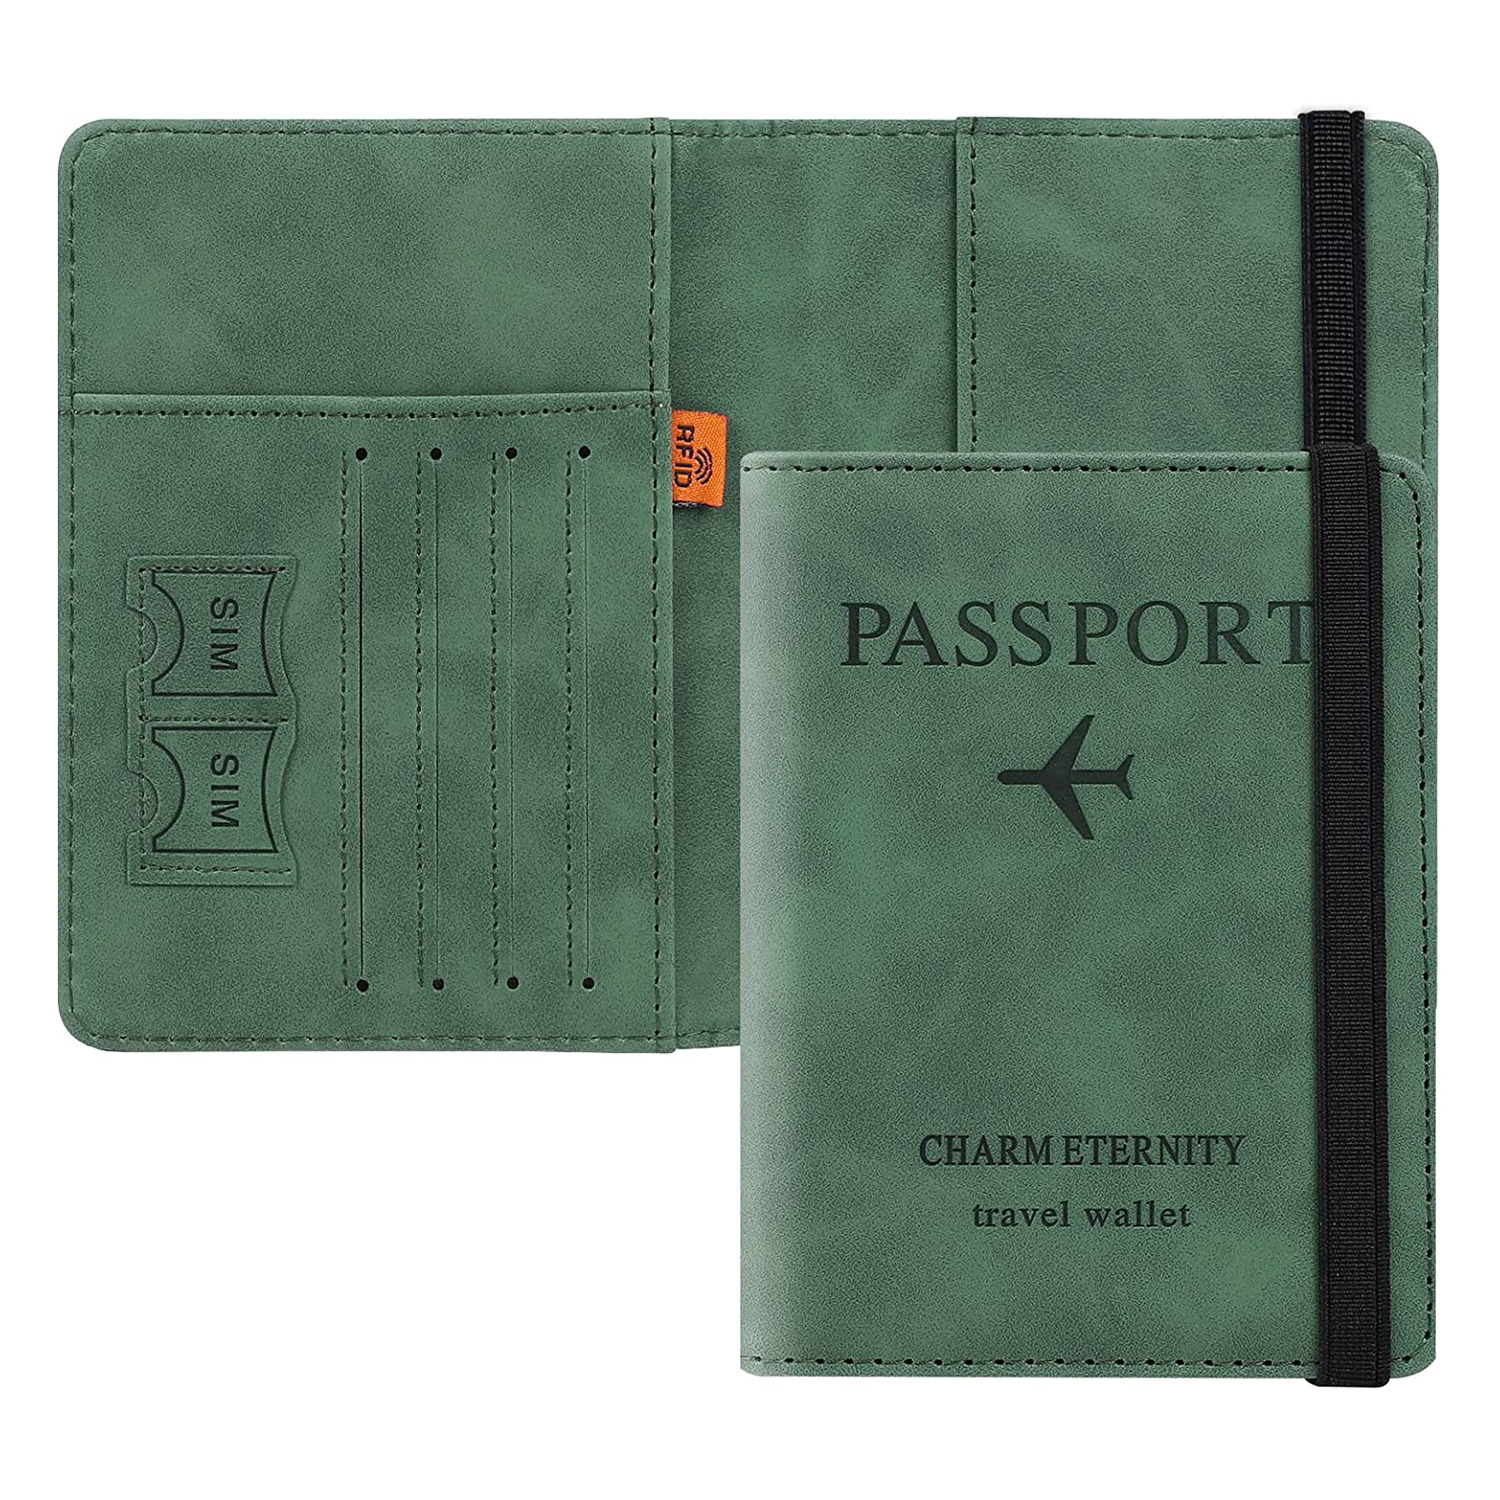 Passport And Vaccine Card Holder Combo Passport Holder Case With